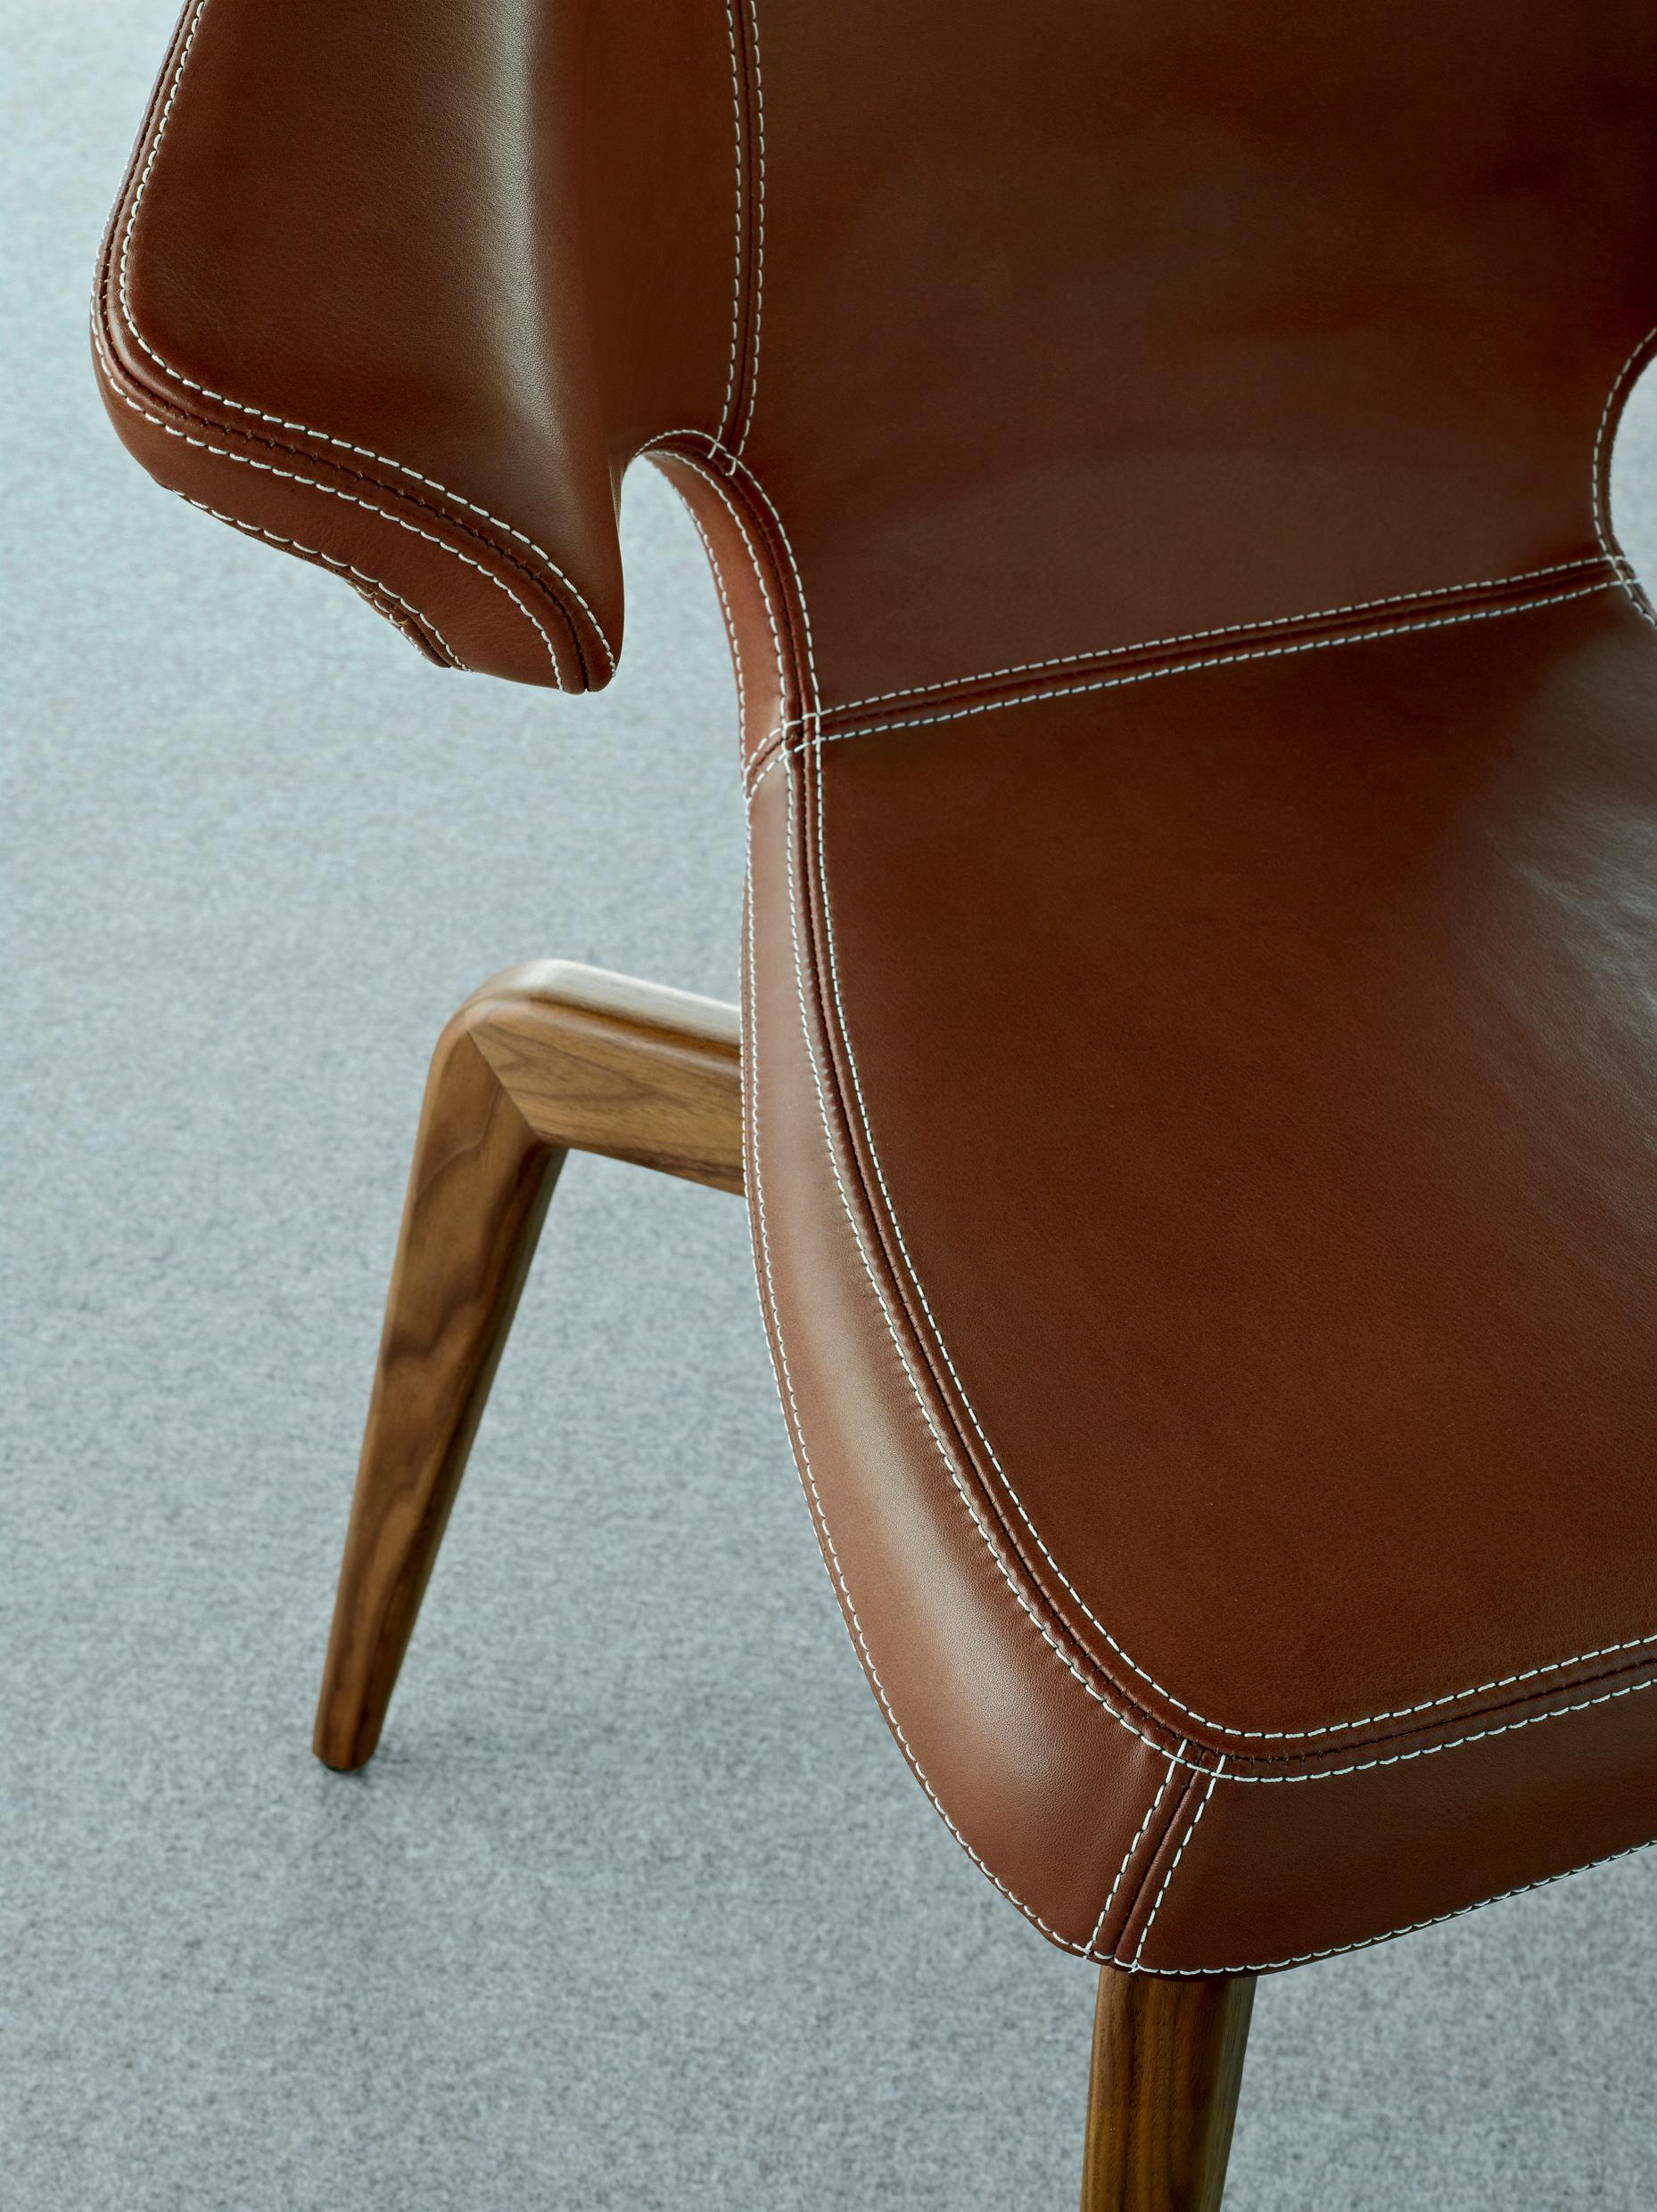 Customizable ClassiCon Munich Armchair by Sauerbruch Hutton In New Condition For Sale In New York, NY